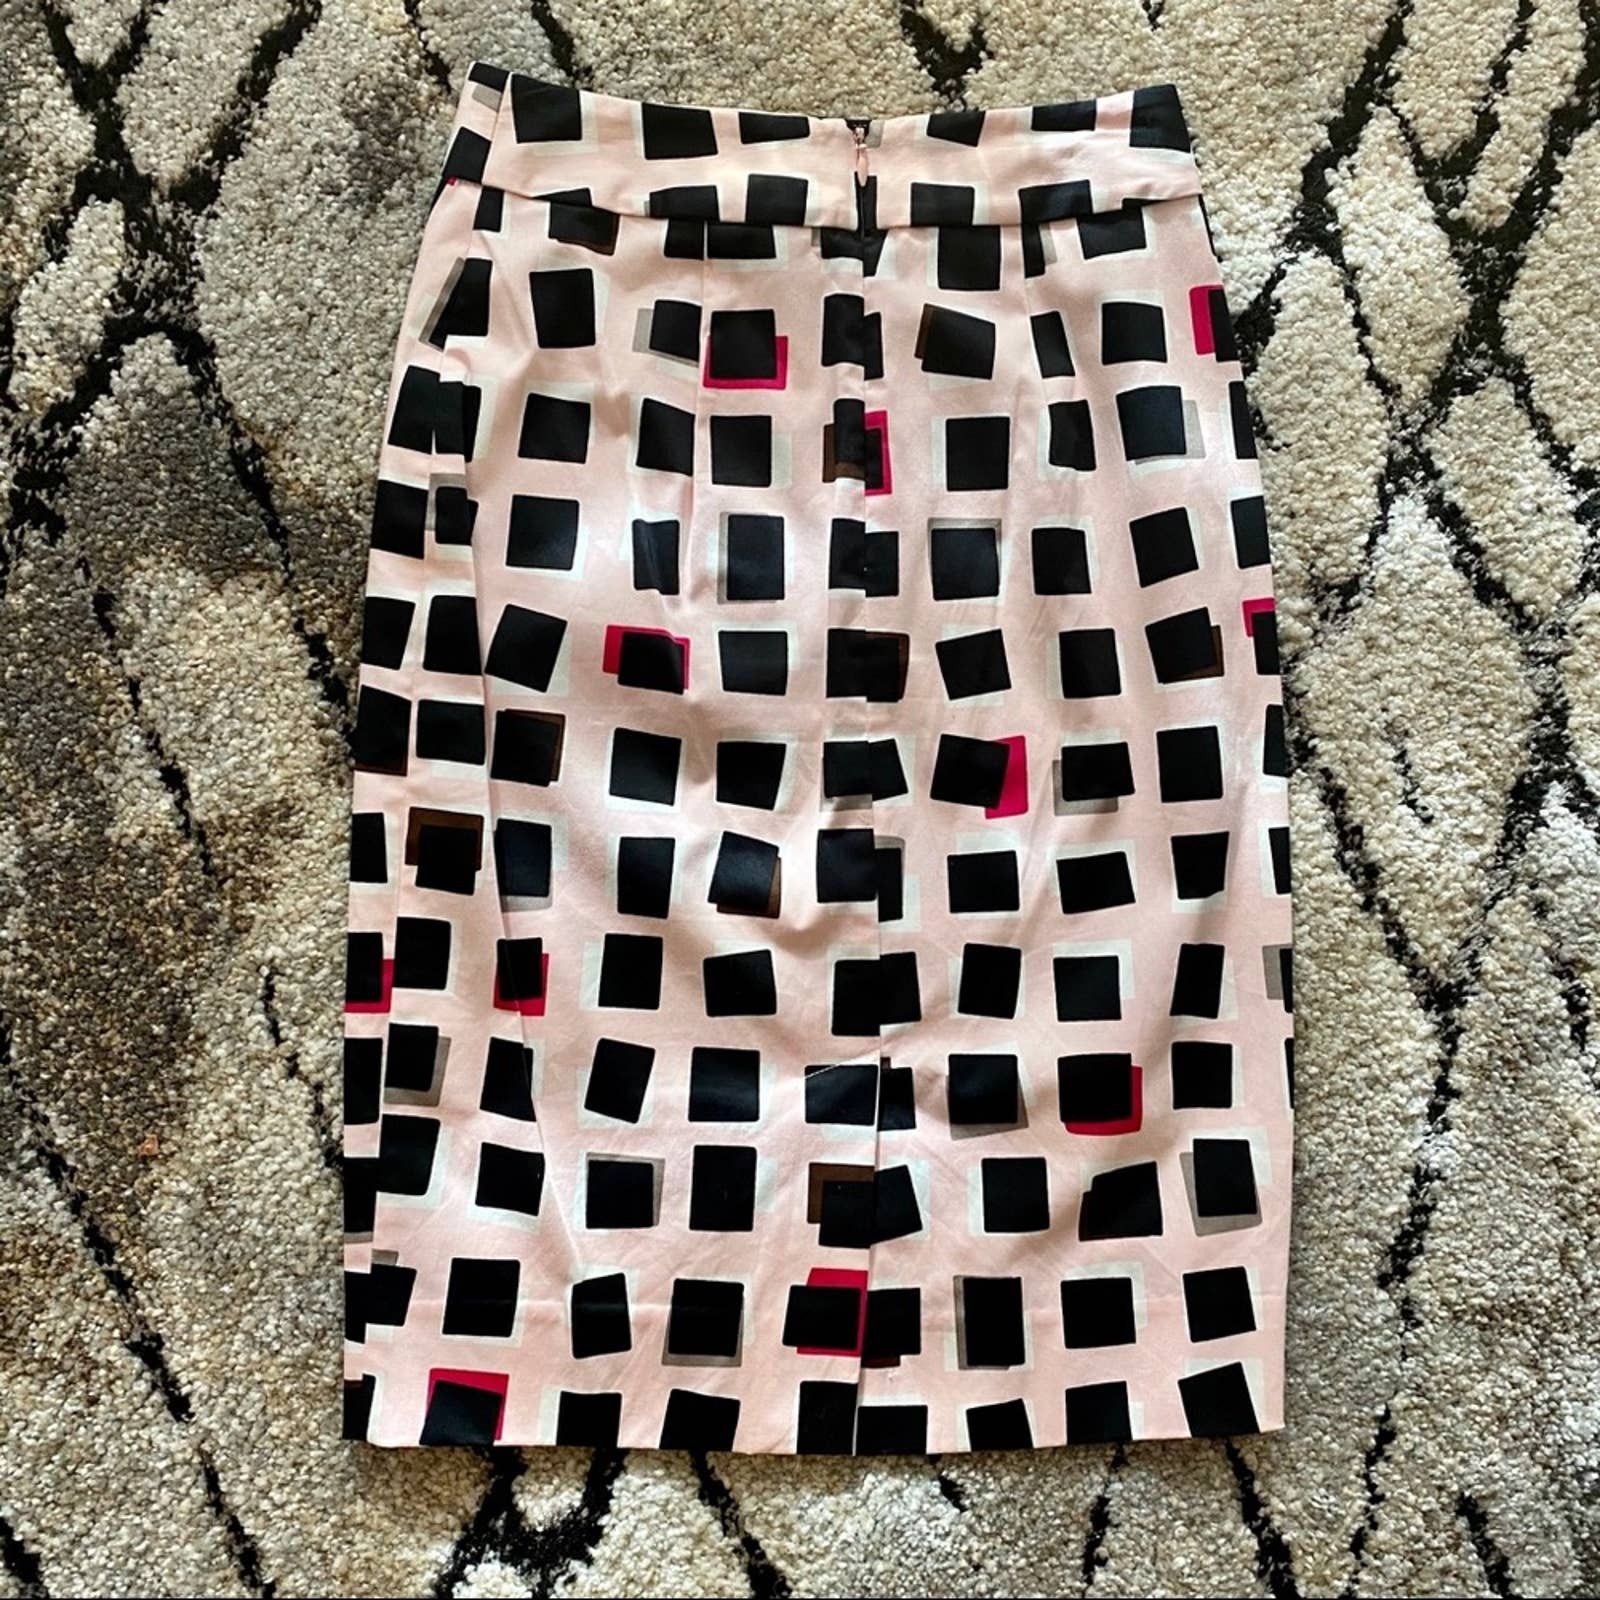 Kate Spade Kate Spade skirt the rules skirt Size 24" / US 00 / IT 34 - 2 Preview